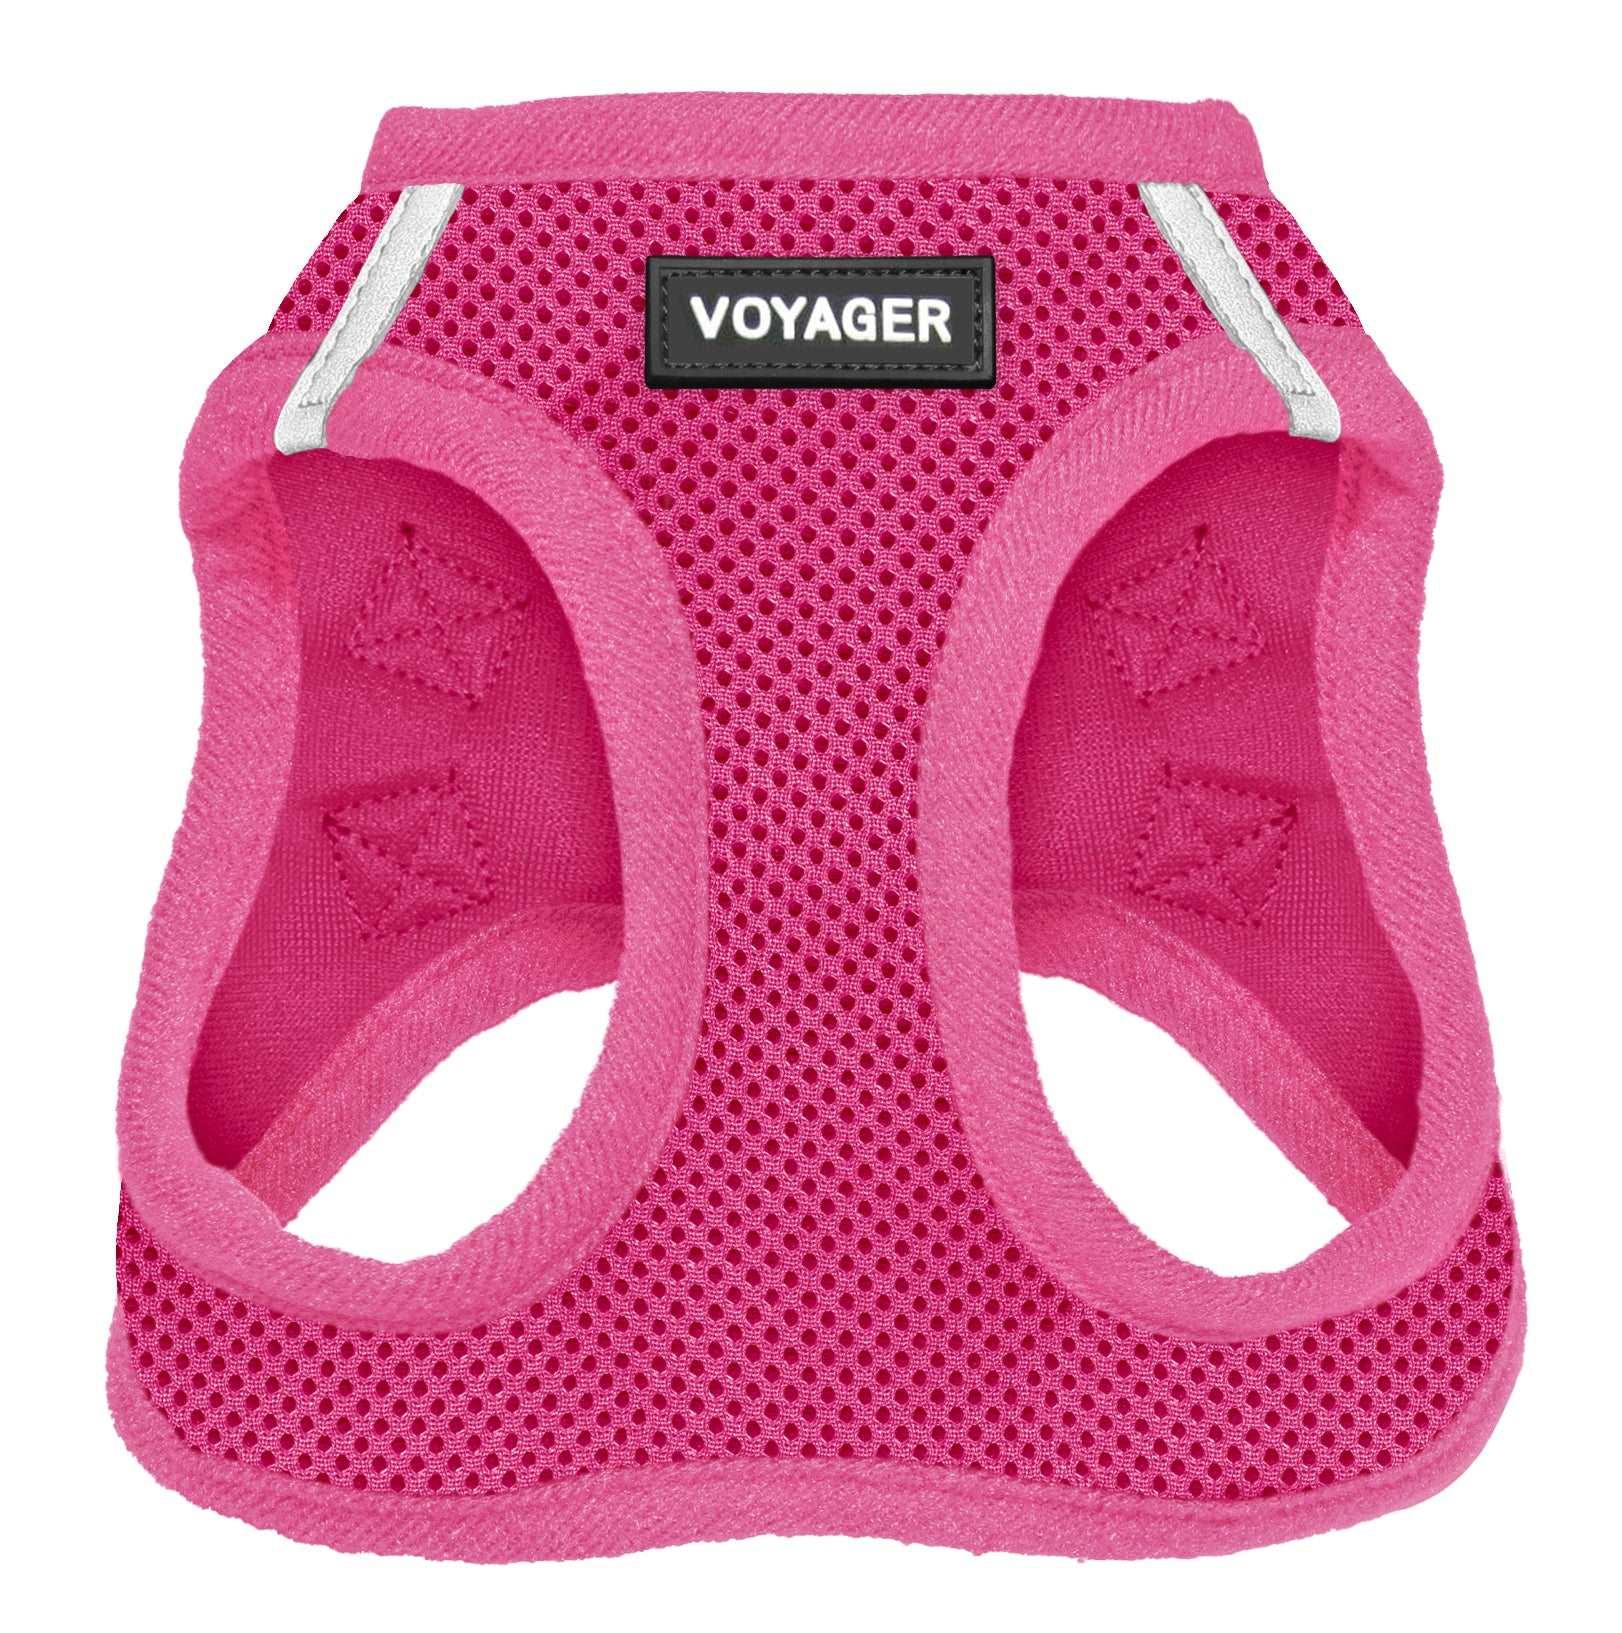 VOYAGER Step-In Air Pet Harness in Fuchsia with Matching Trim and Webbing - Front